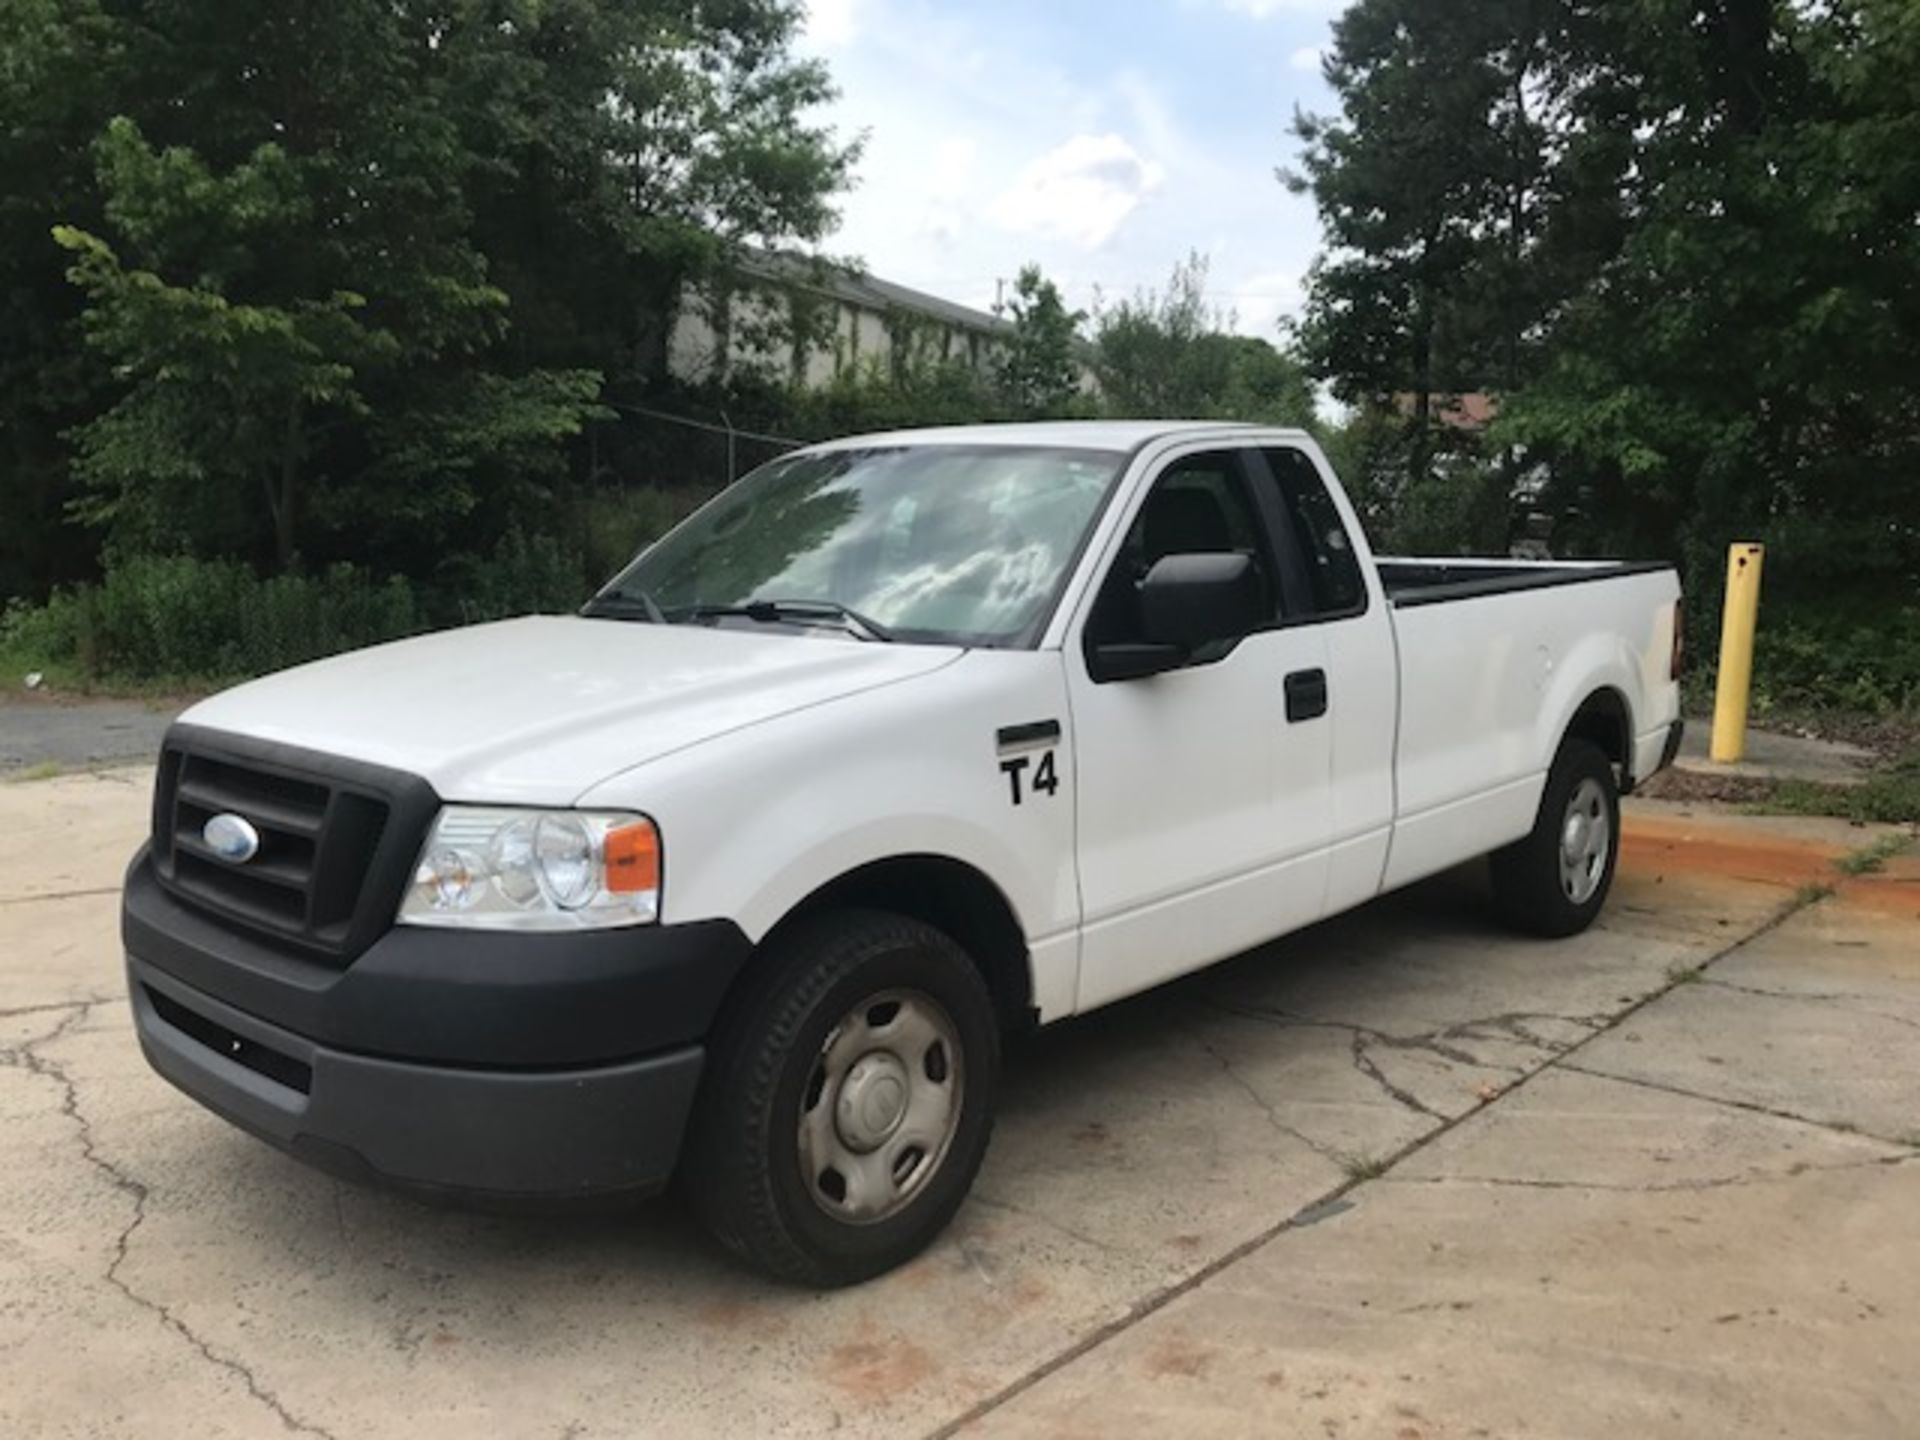 Ford F-150 Pick Up Truck with 8' Bed, Automatic Transmission, Air Conditioning, Radio, Approx 185,